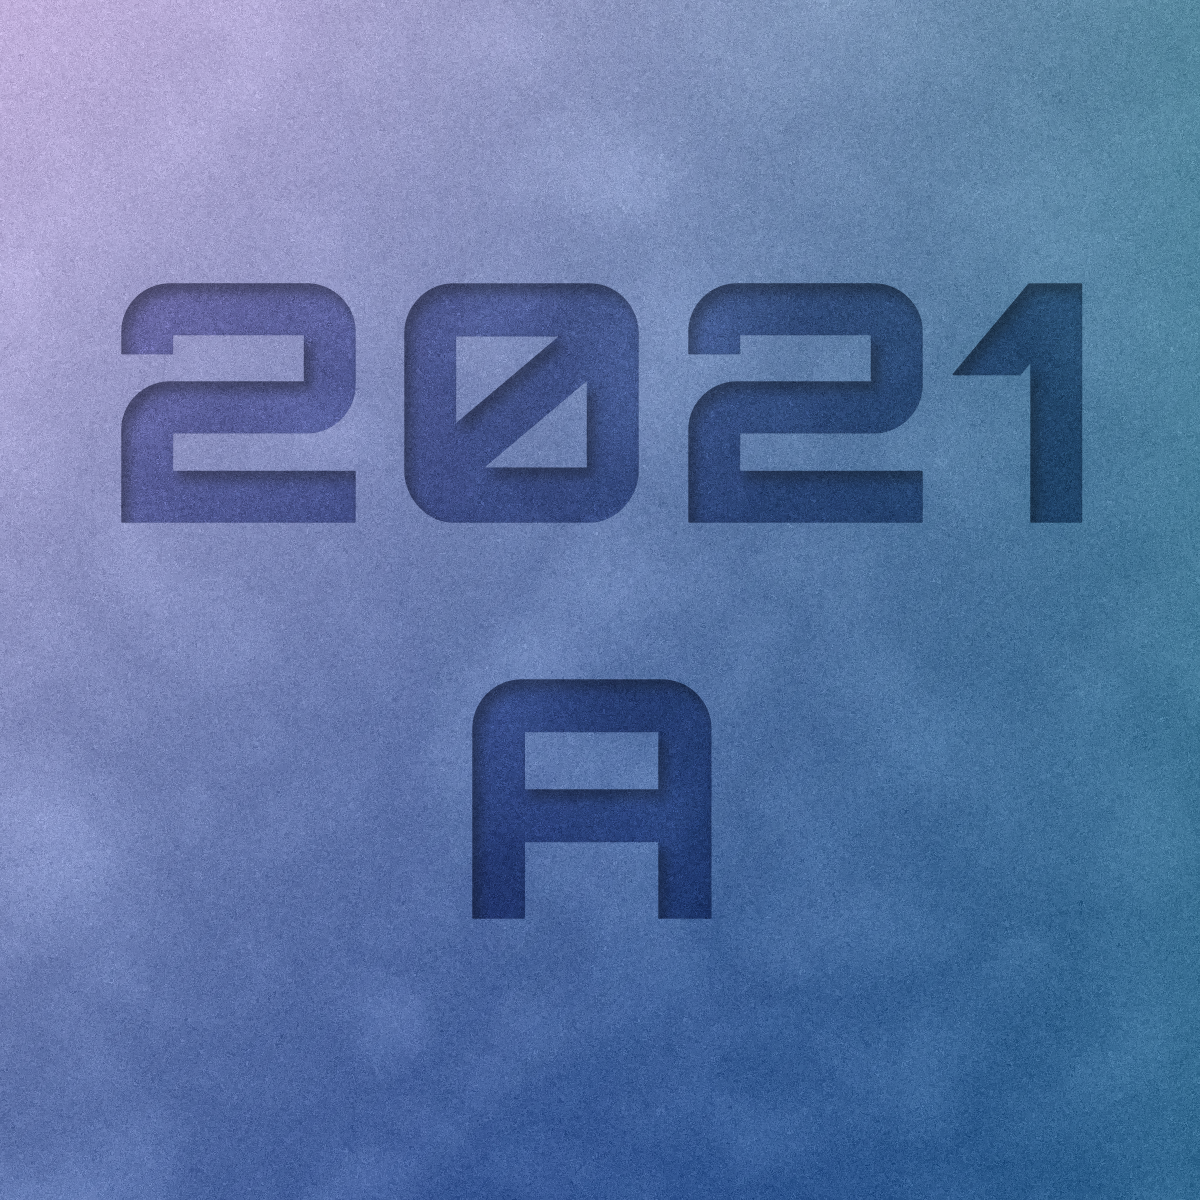 2021 A Playlist cover art